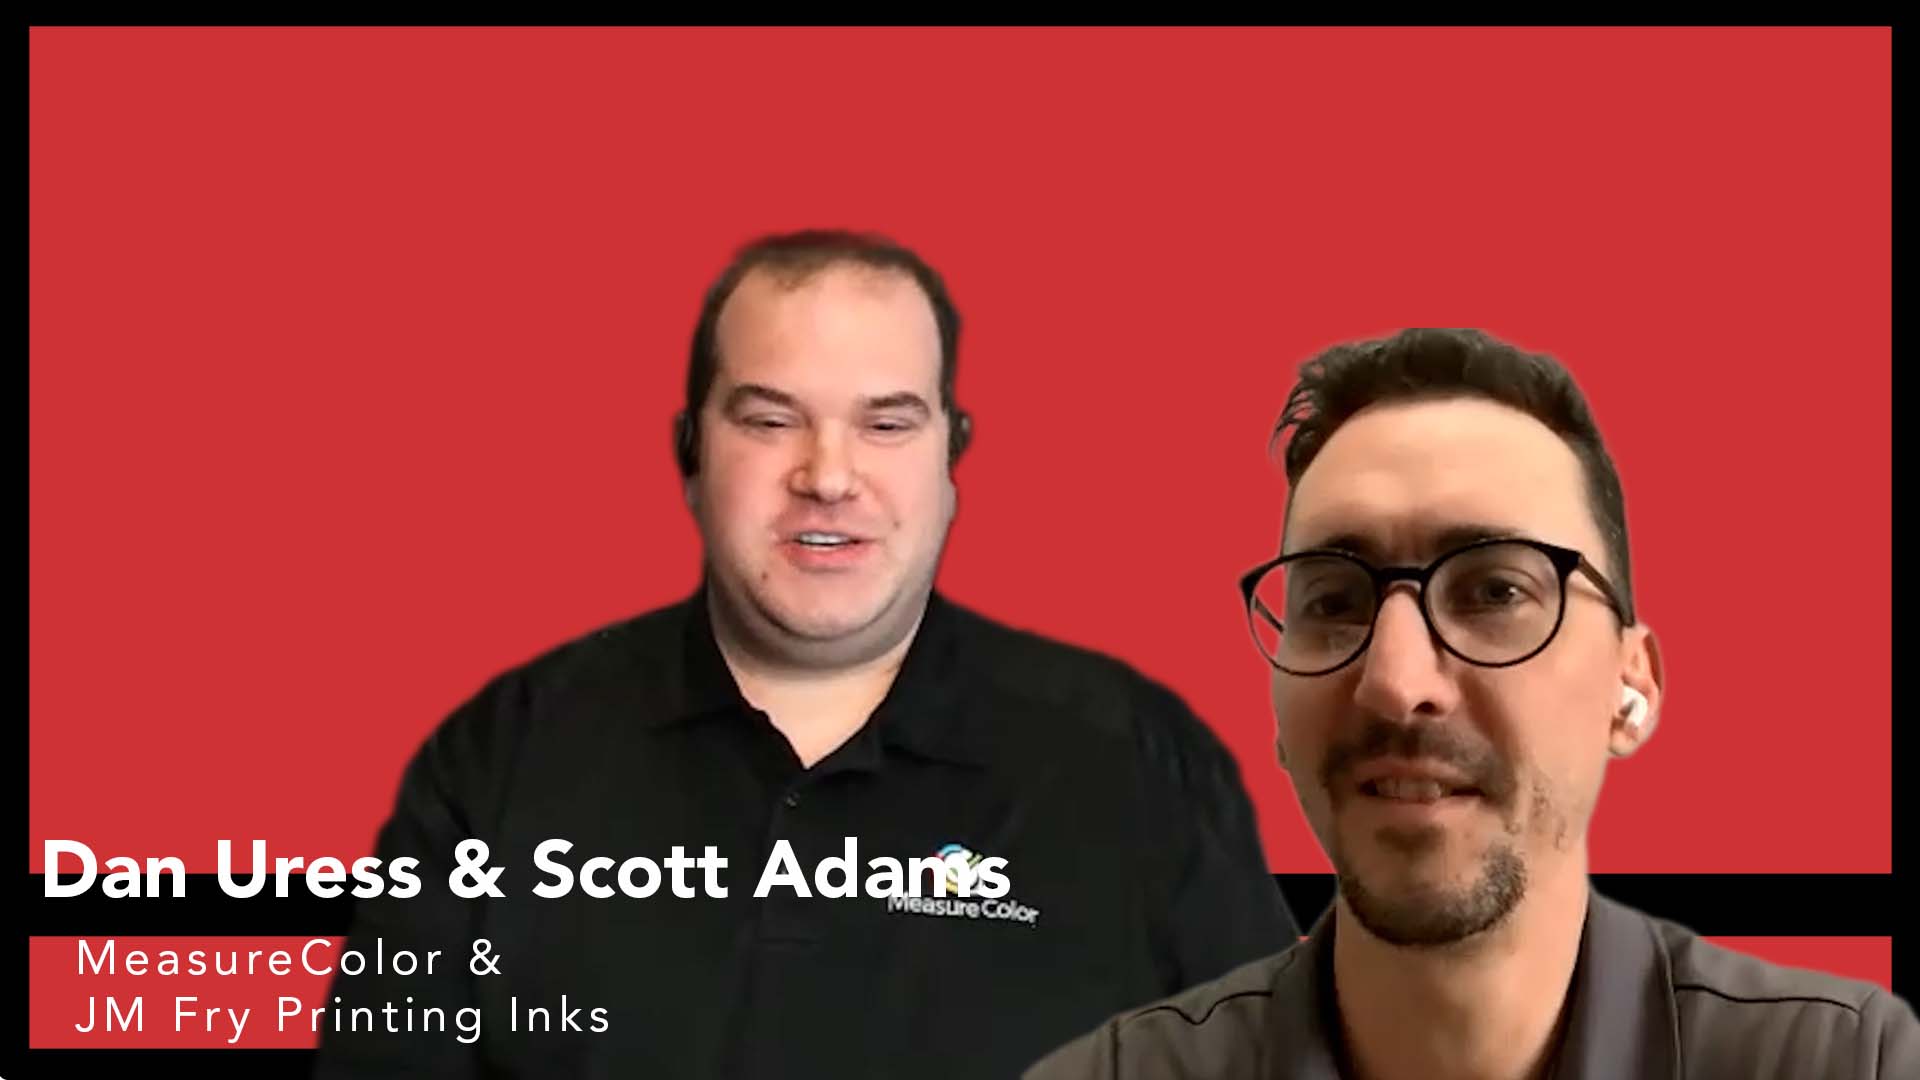 Dan Uress and Scott Adams Geek Out Over Mobile Color Solutions